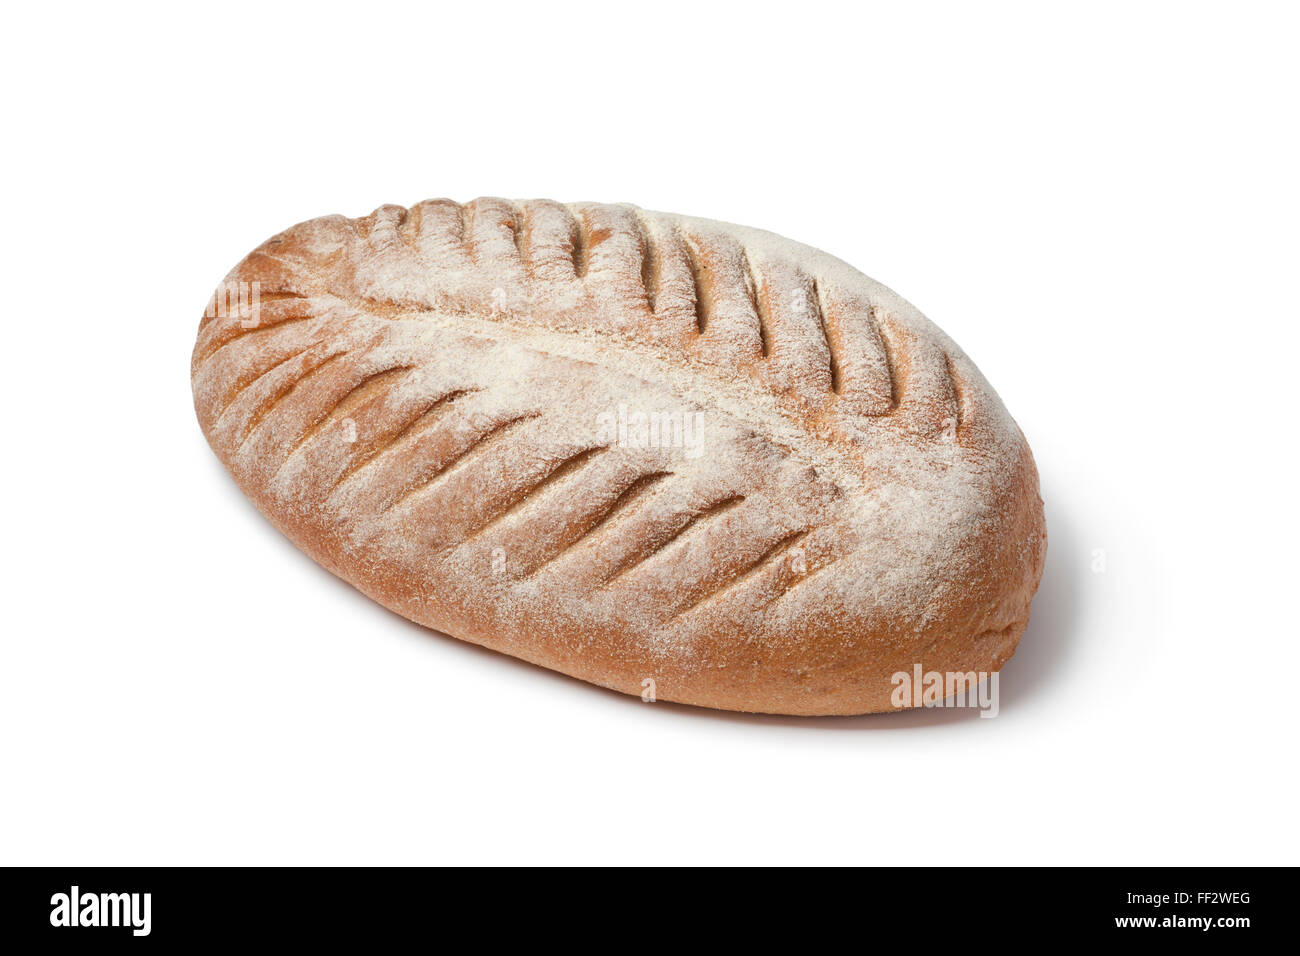 Fresh loaf of French farmers bread on white background Stock Photo